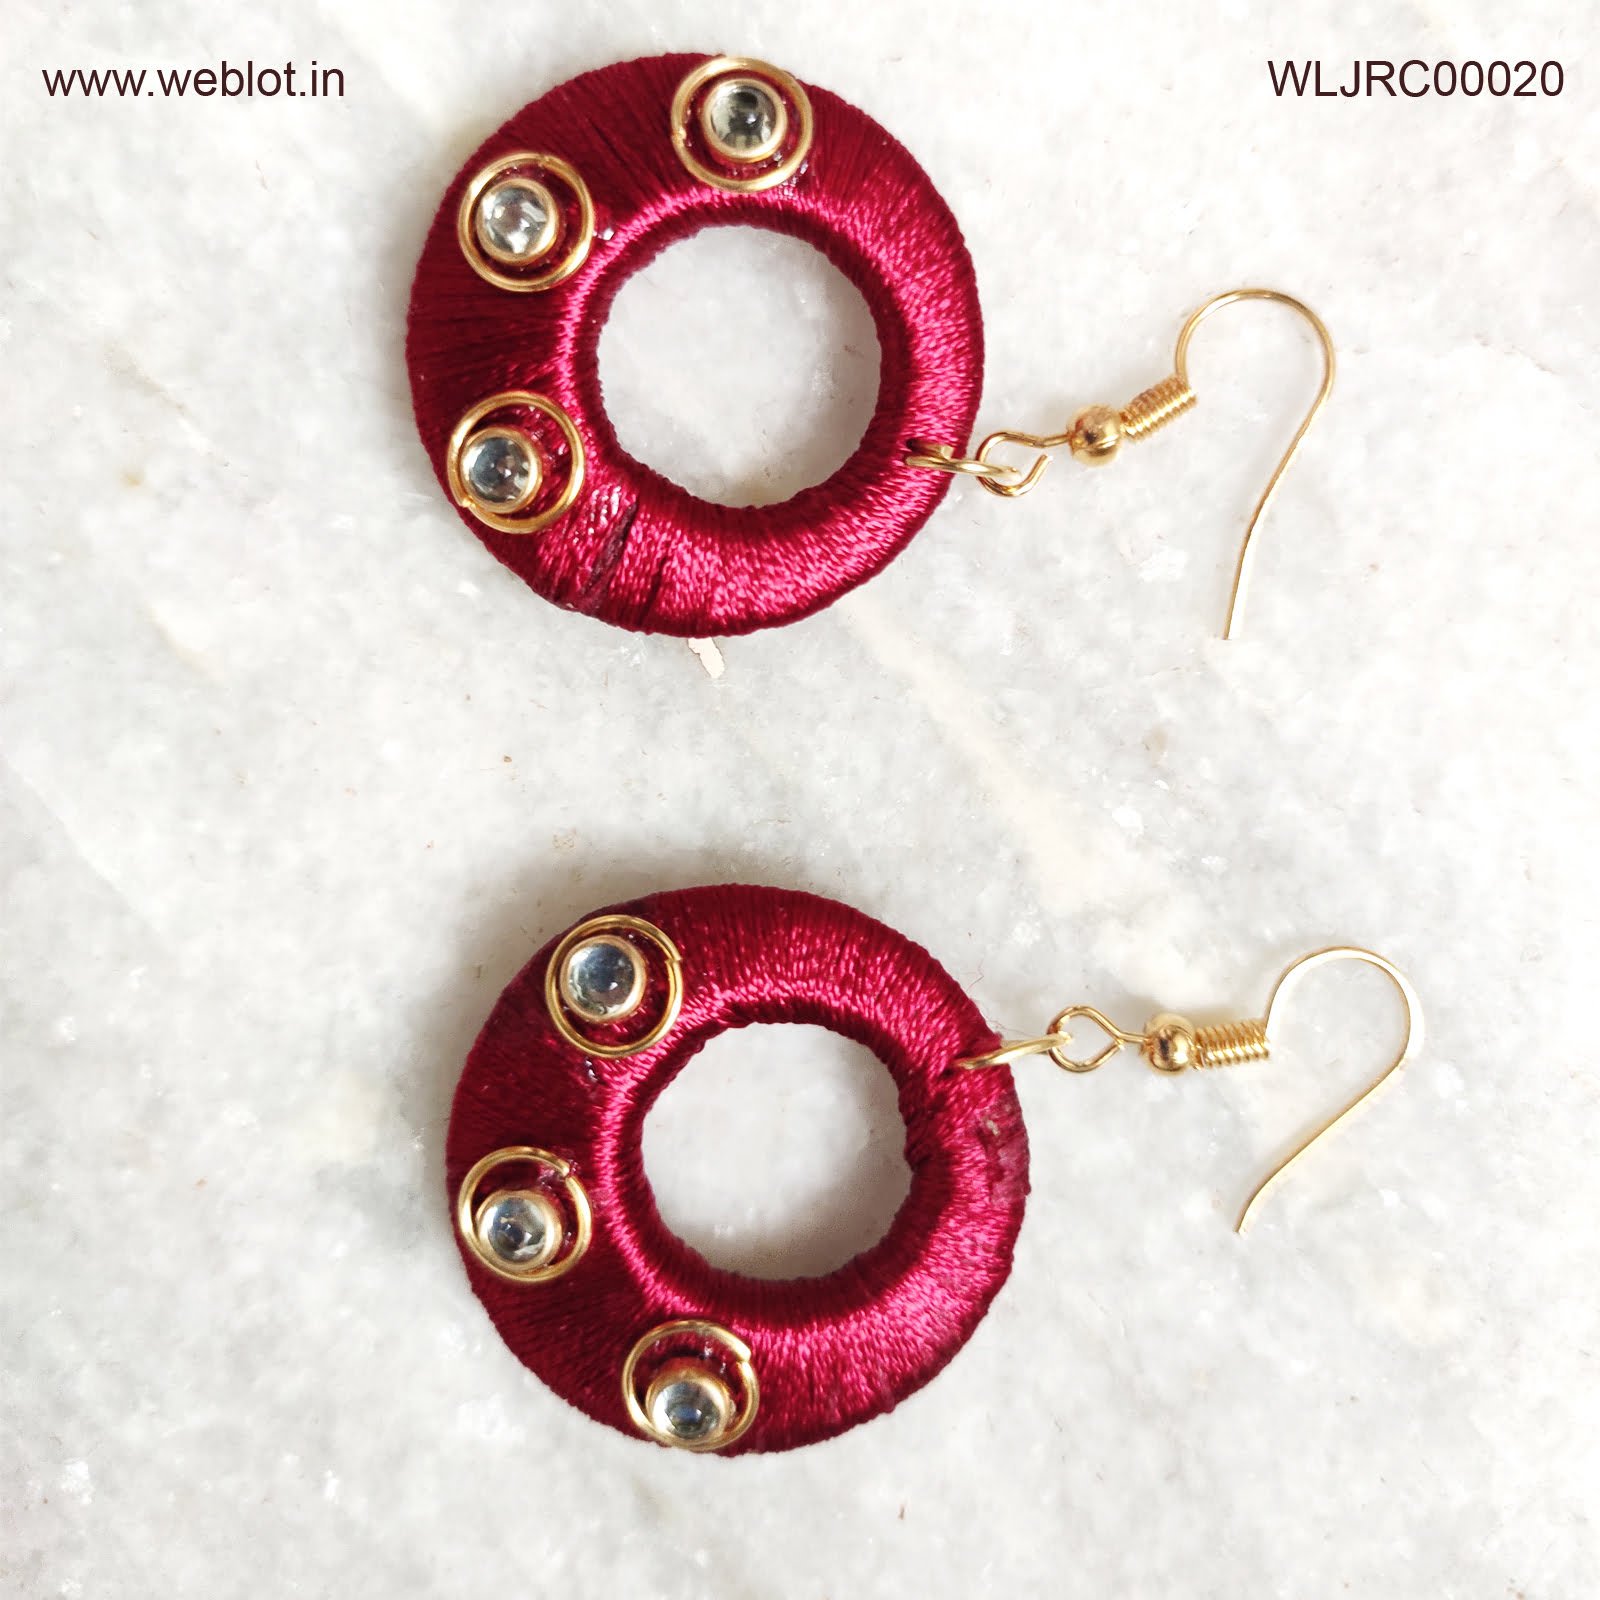 Handcrafted Fabric Earring For Girl And Women. | K M HandiCrafts India